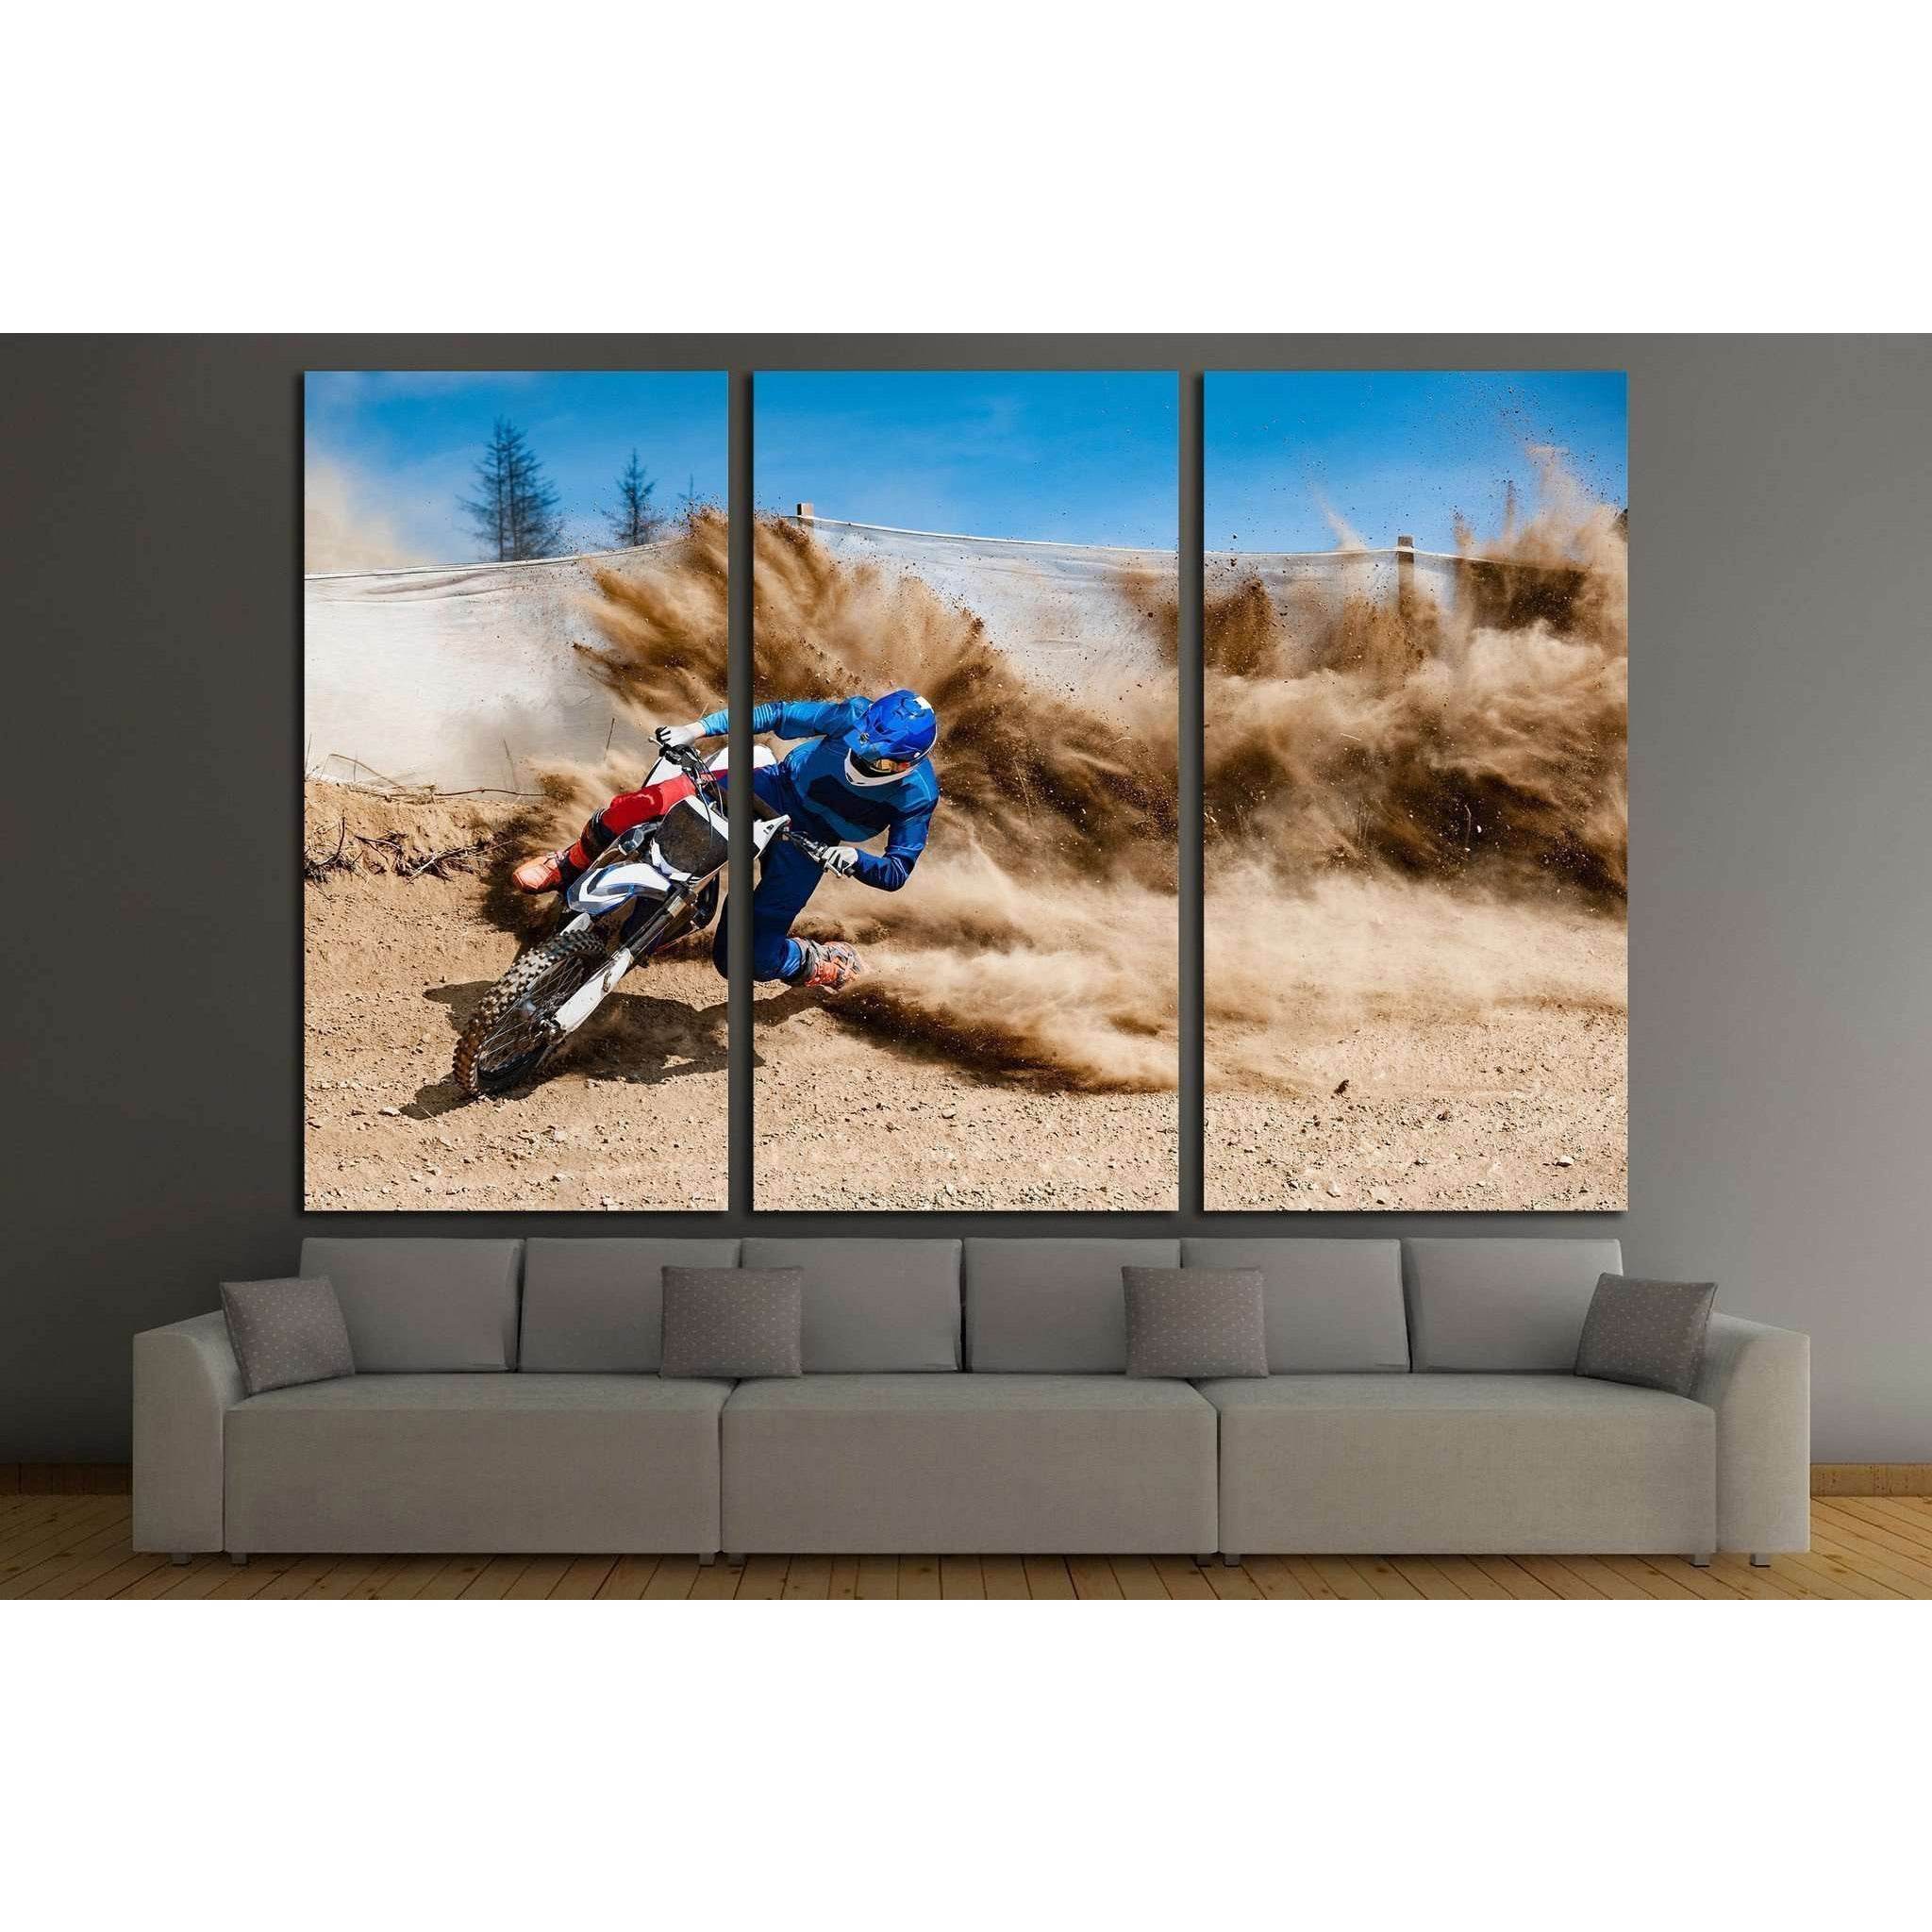 Motocross rider creates a large cloud of dust and debris №1878 Ready to Hang Canvas Print